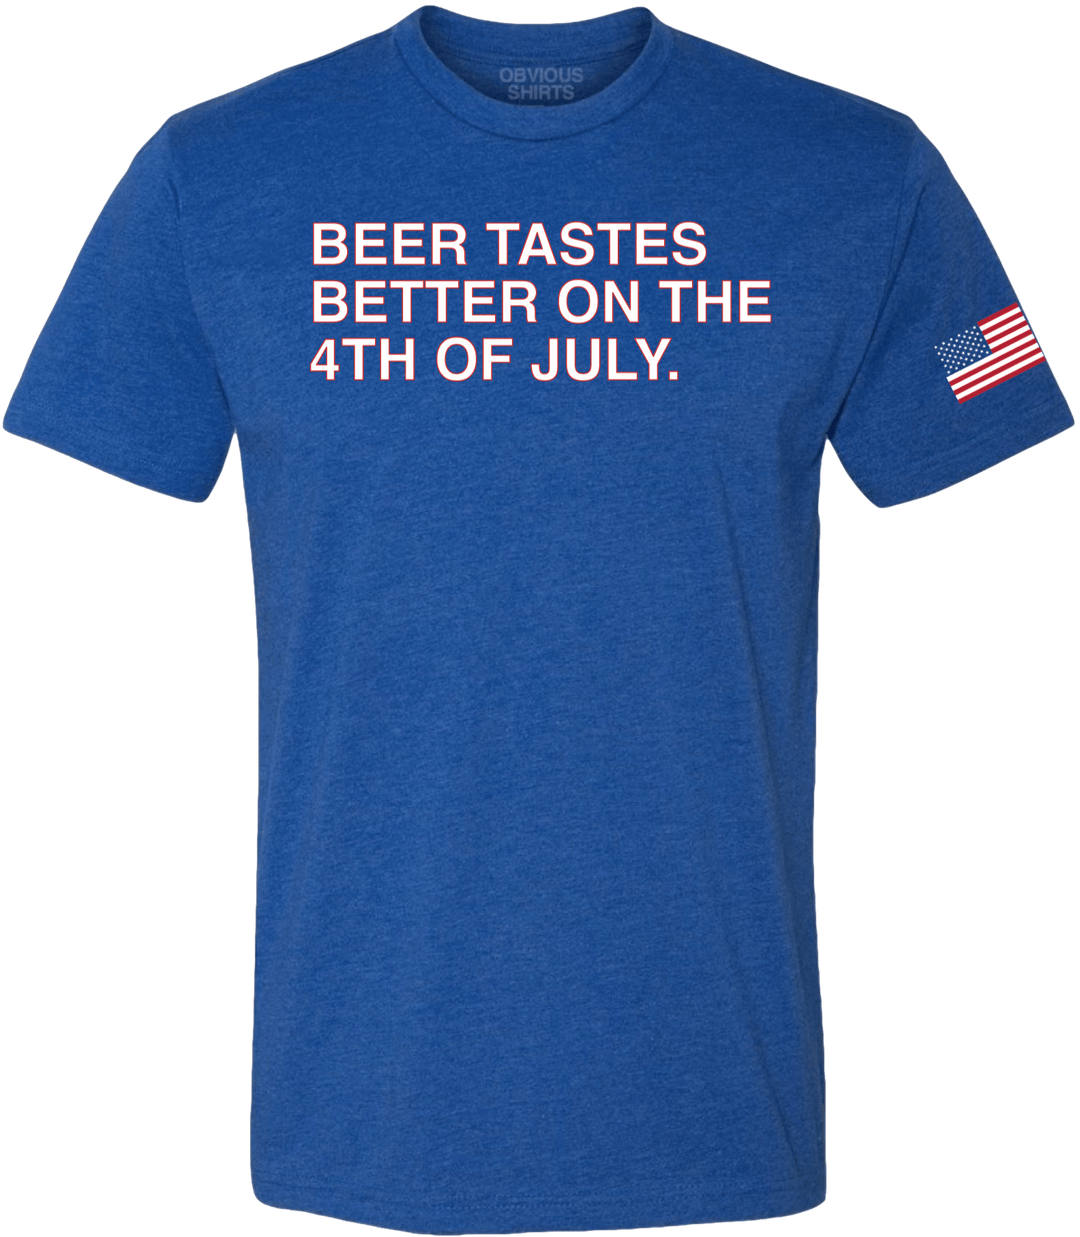 BEER TASTES BETTER ON THE 4TH OF JULY - OBVIOUS SHIRTS